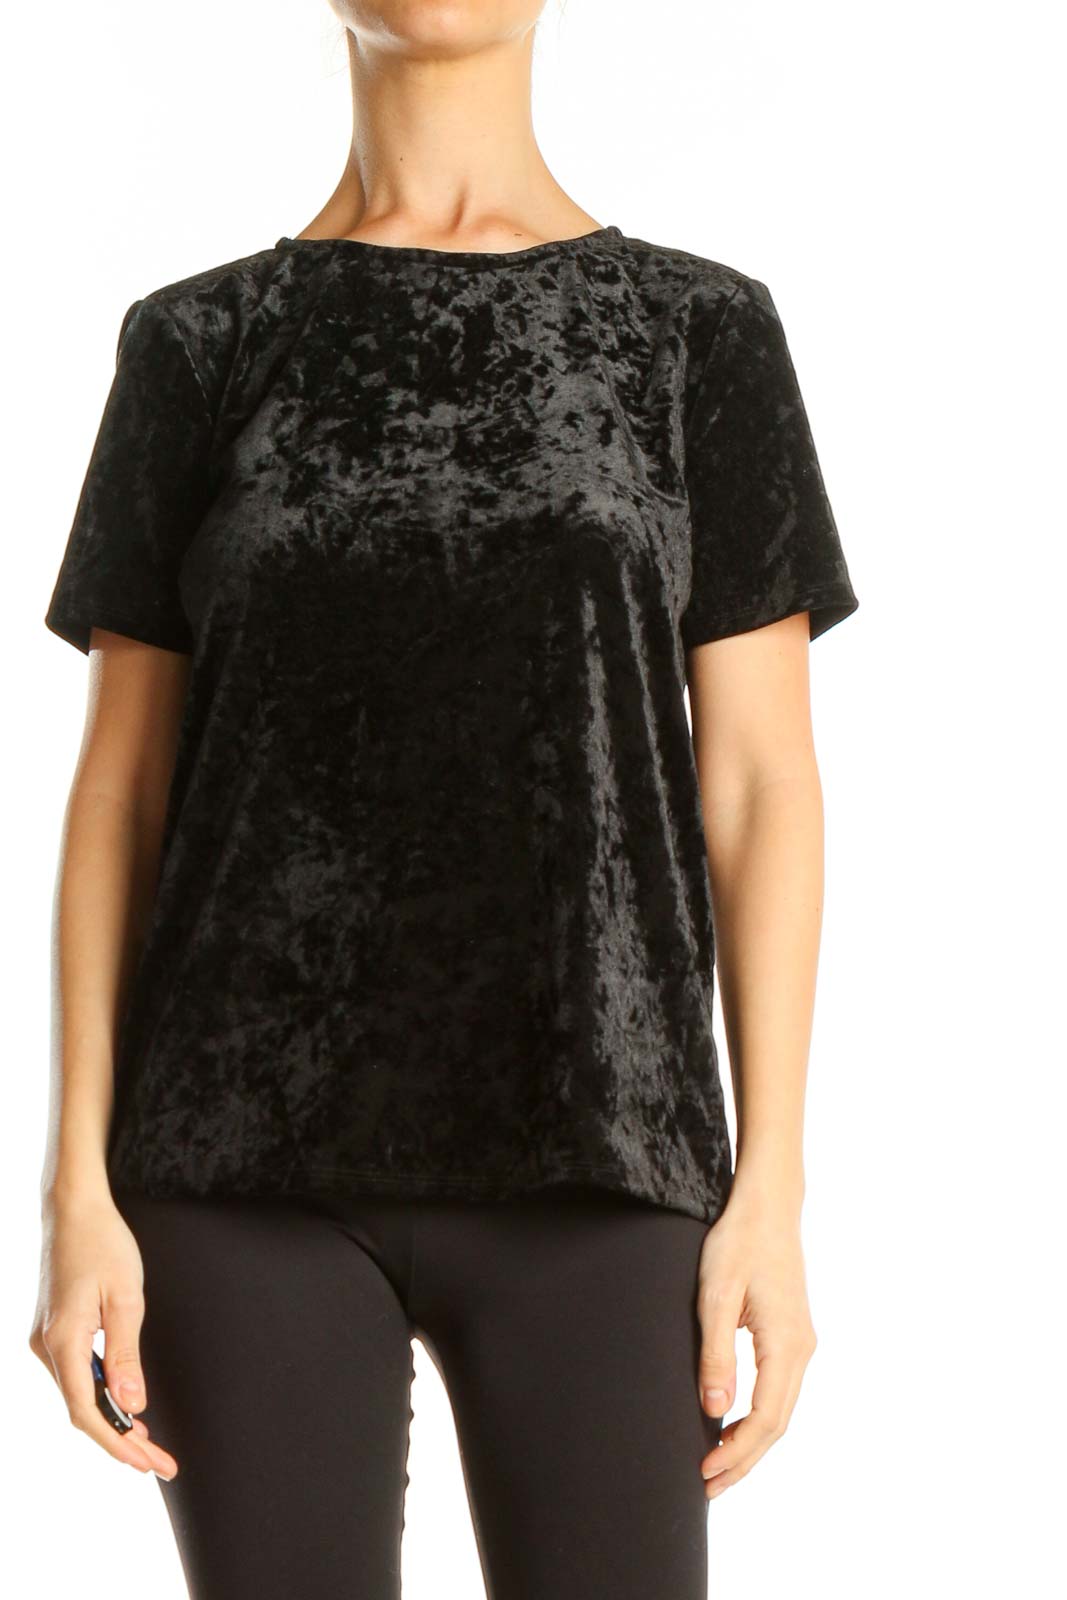 Black Velour All Day Wear Top Front